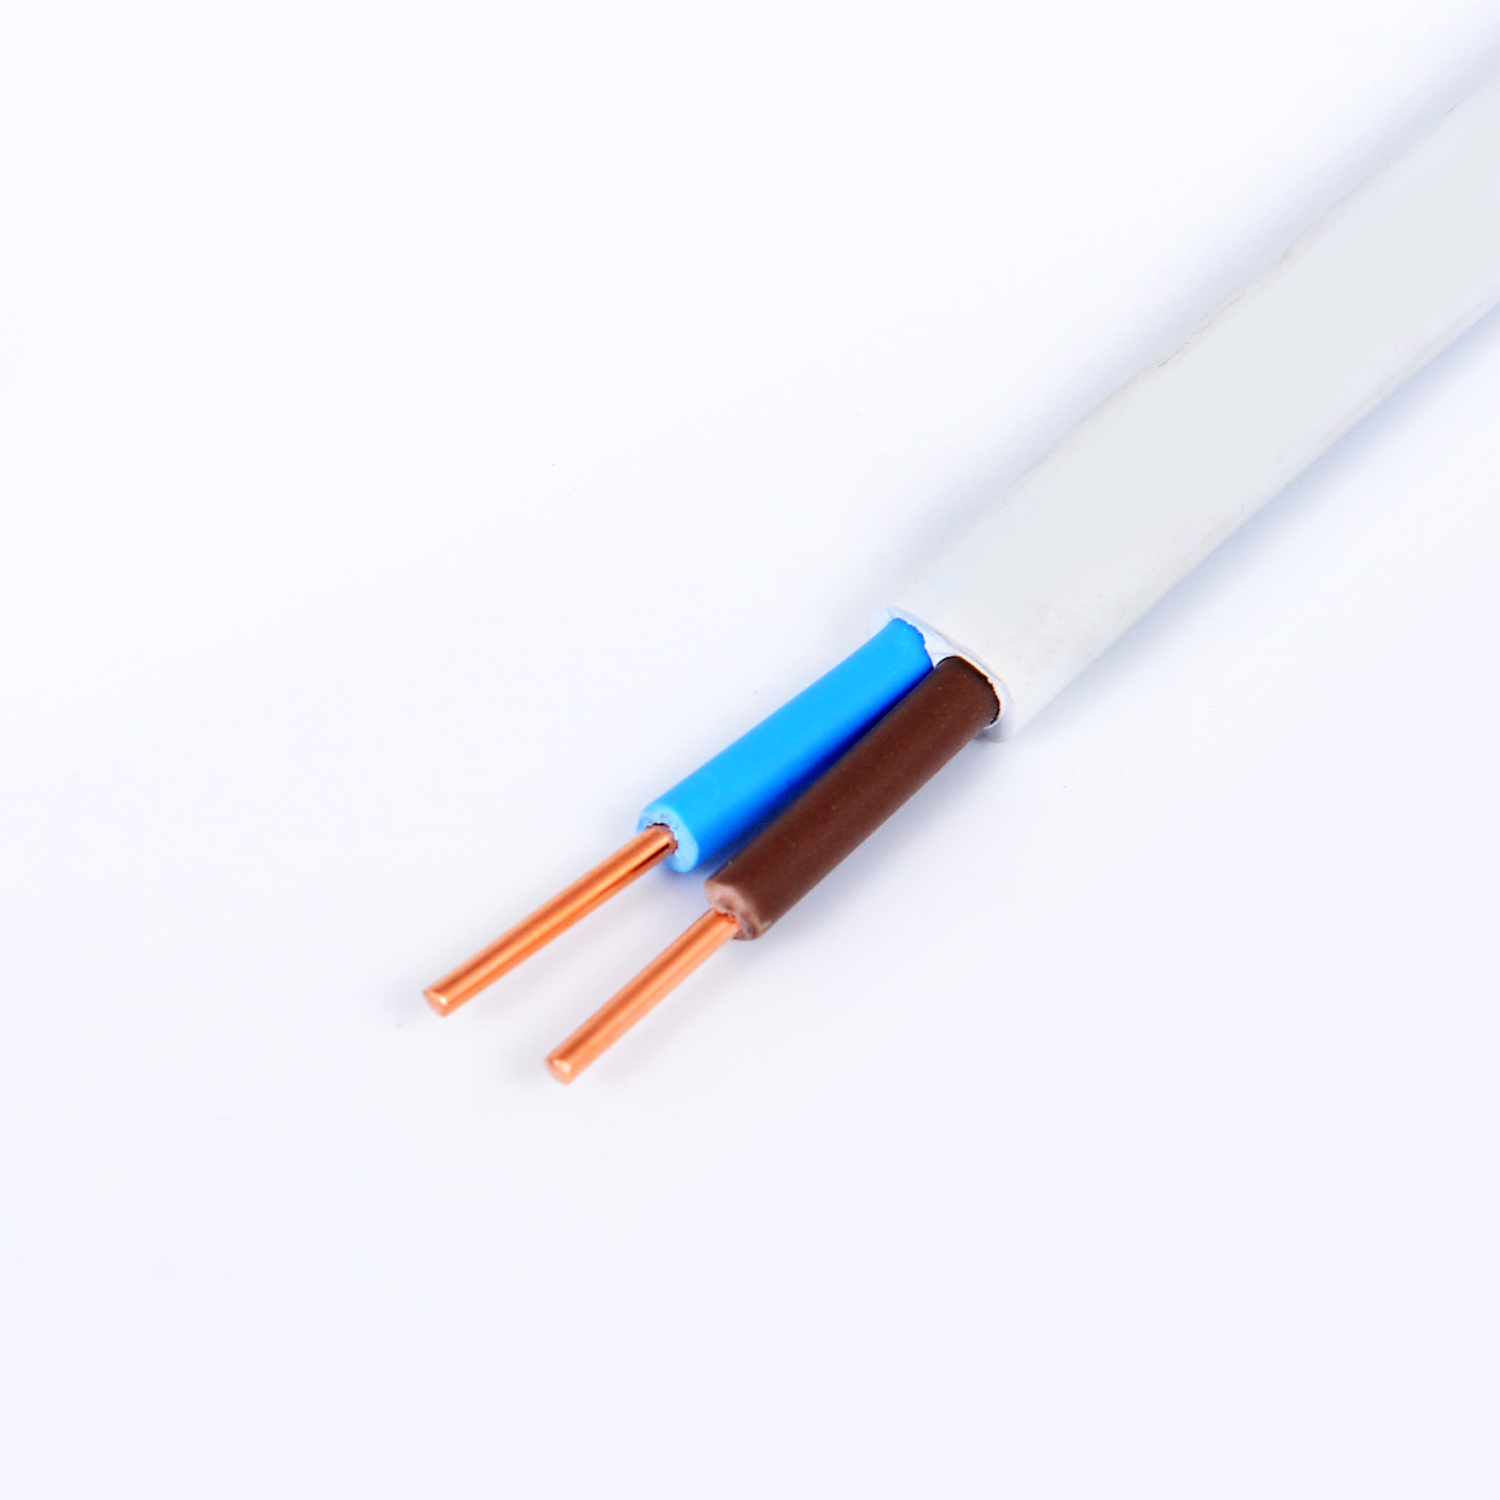 Ce Approved H05vvh2-F H07vvh2-F PVC Insulated Copper Conductor BVVB Flat Electric Wire